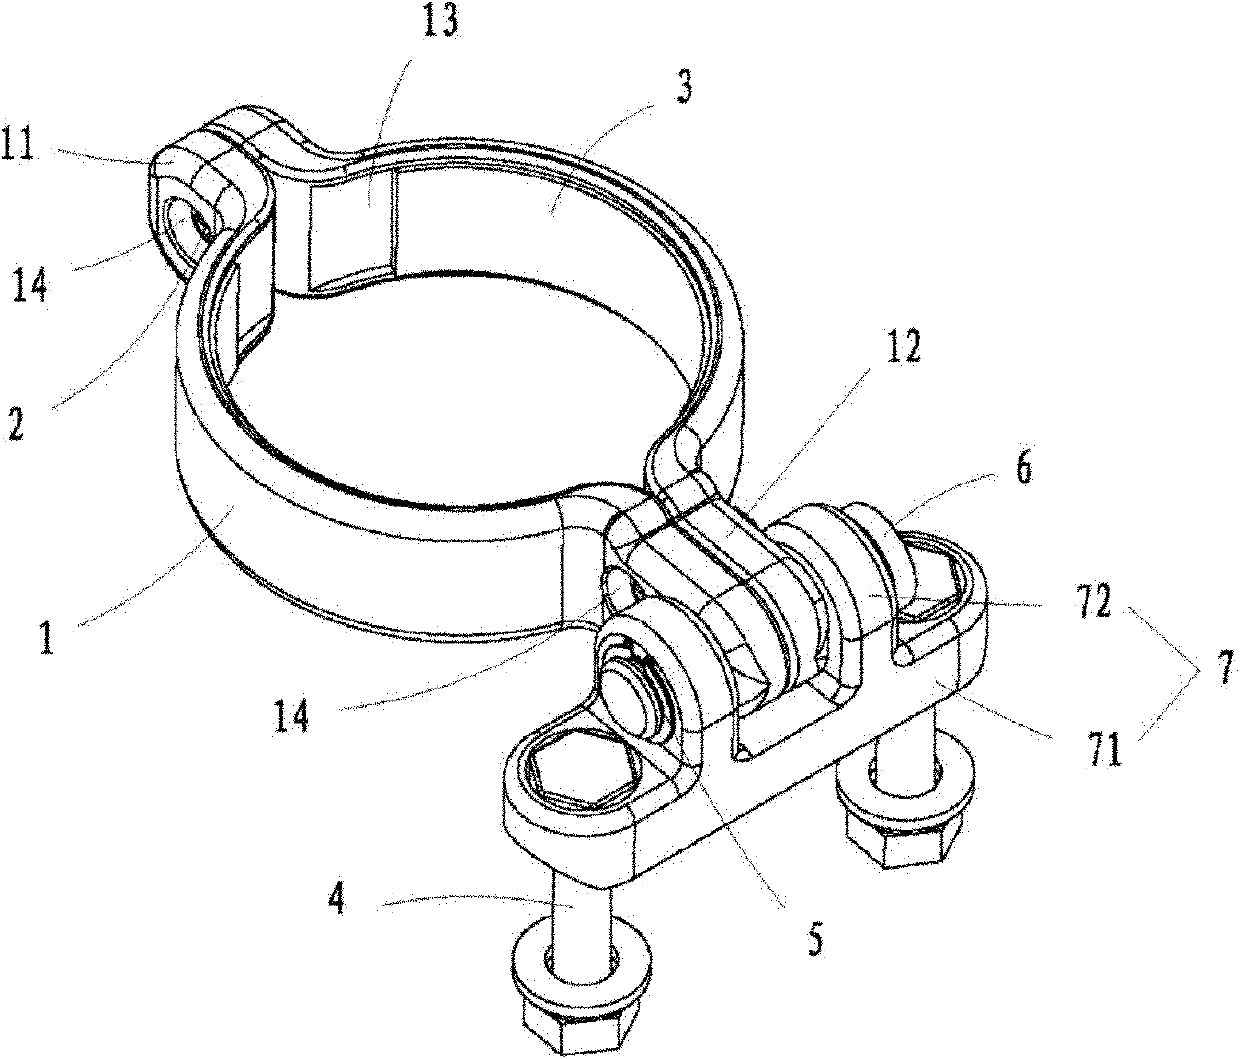 Locking structure capable of rotating lamp pole